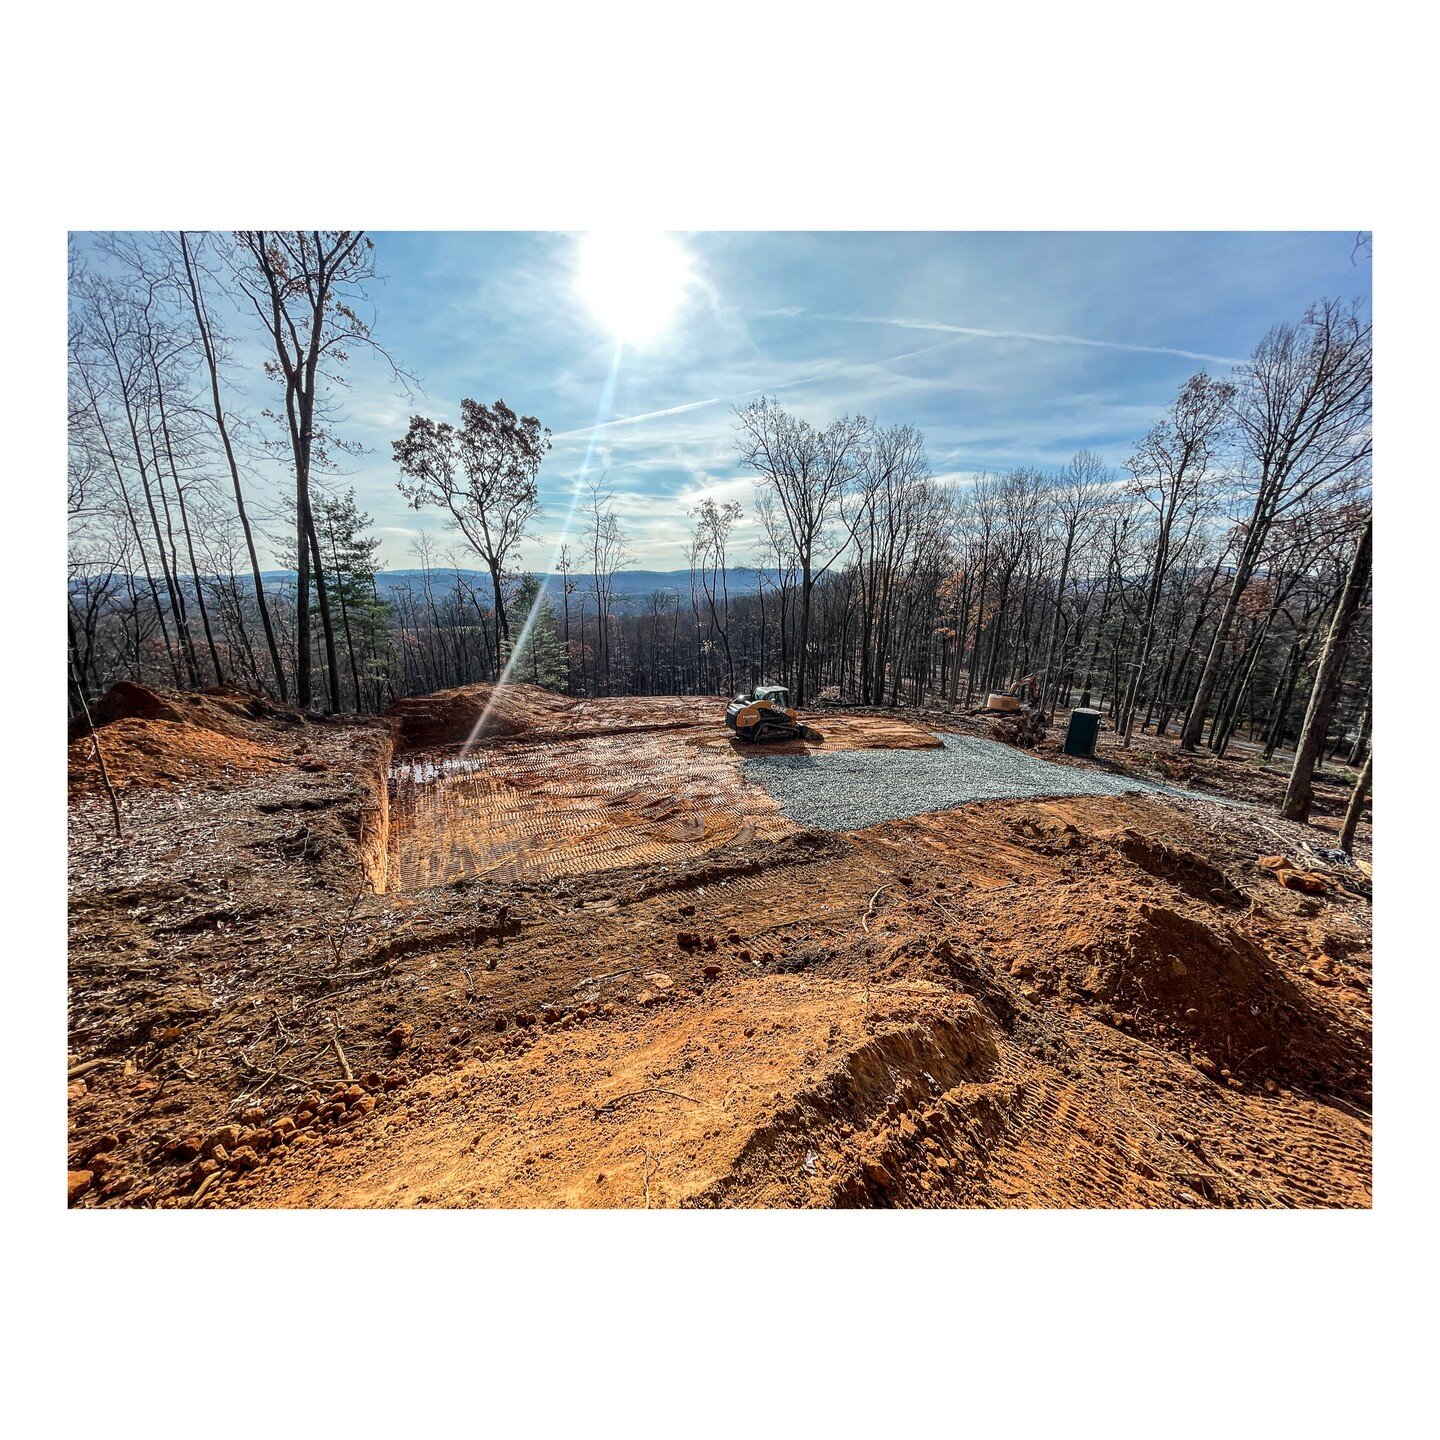 beautiful day to break ground on a new residence outside of Charlottesville #residentialdesign #architecture #wip #construction #charlottesville #turnermountain #twostreetstudio